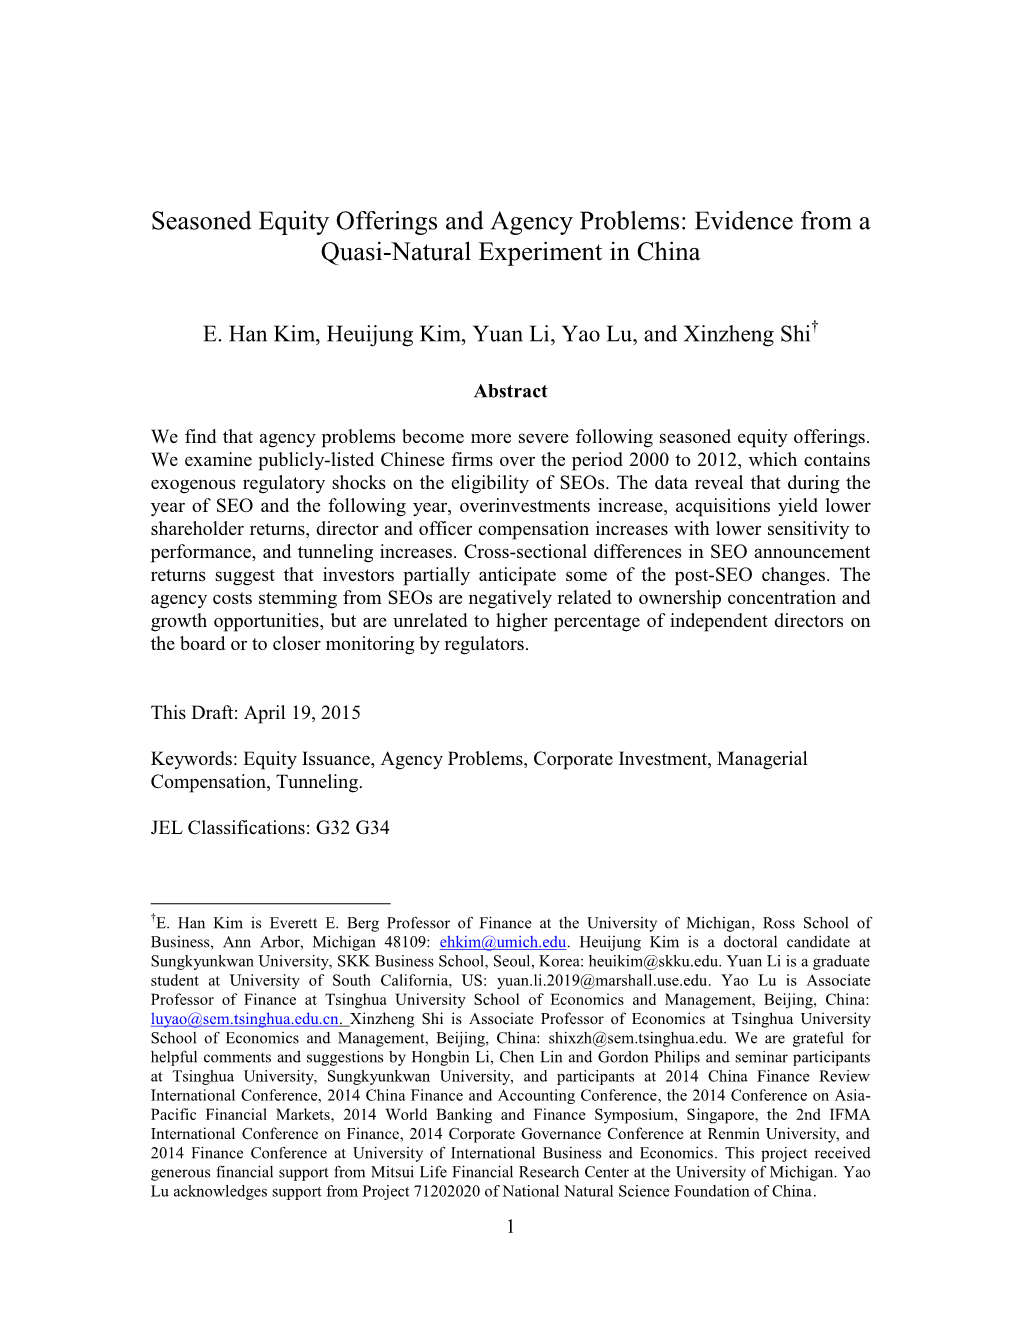 Seasoned Equity Offerings and Agency Problems: Evidence from a Quasi-Natural Experiment in China